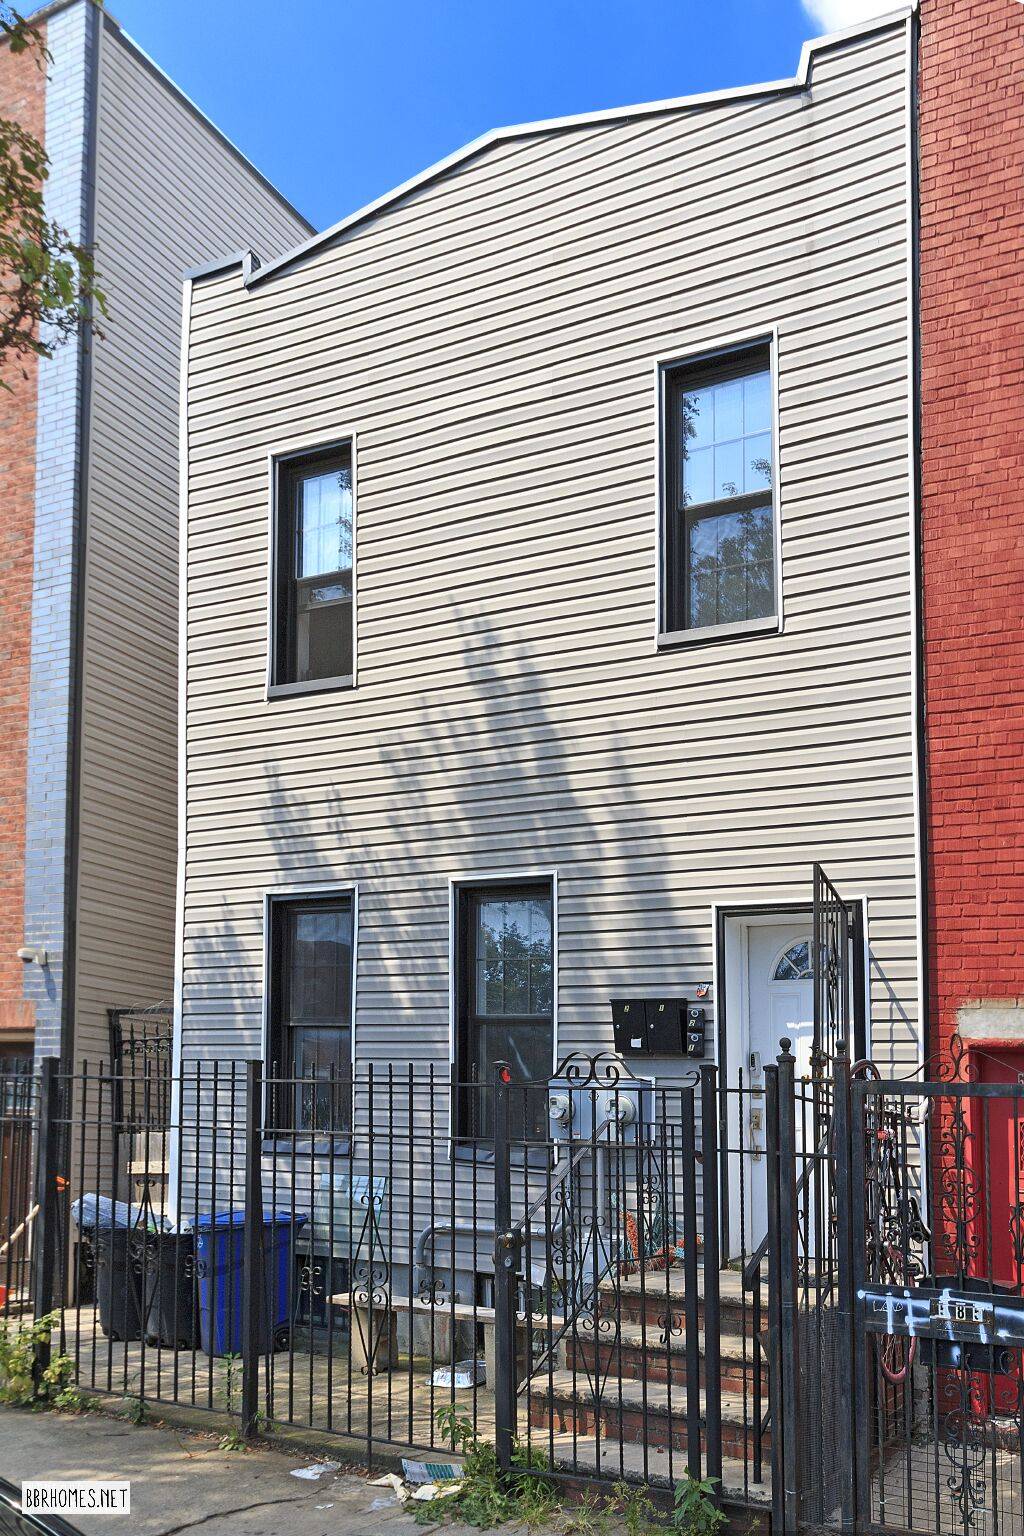 We are please to offer for sale 583 Hart St, located in the heart of Bushwick This two story 2 unit multi family building features two 3 bedroom apartments with ...